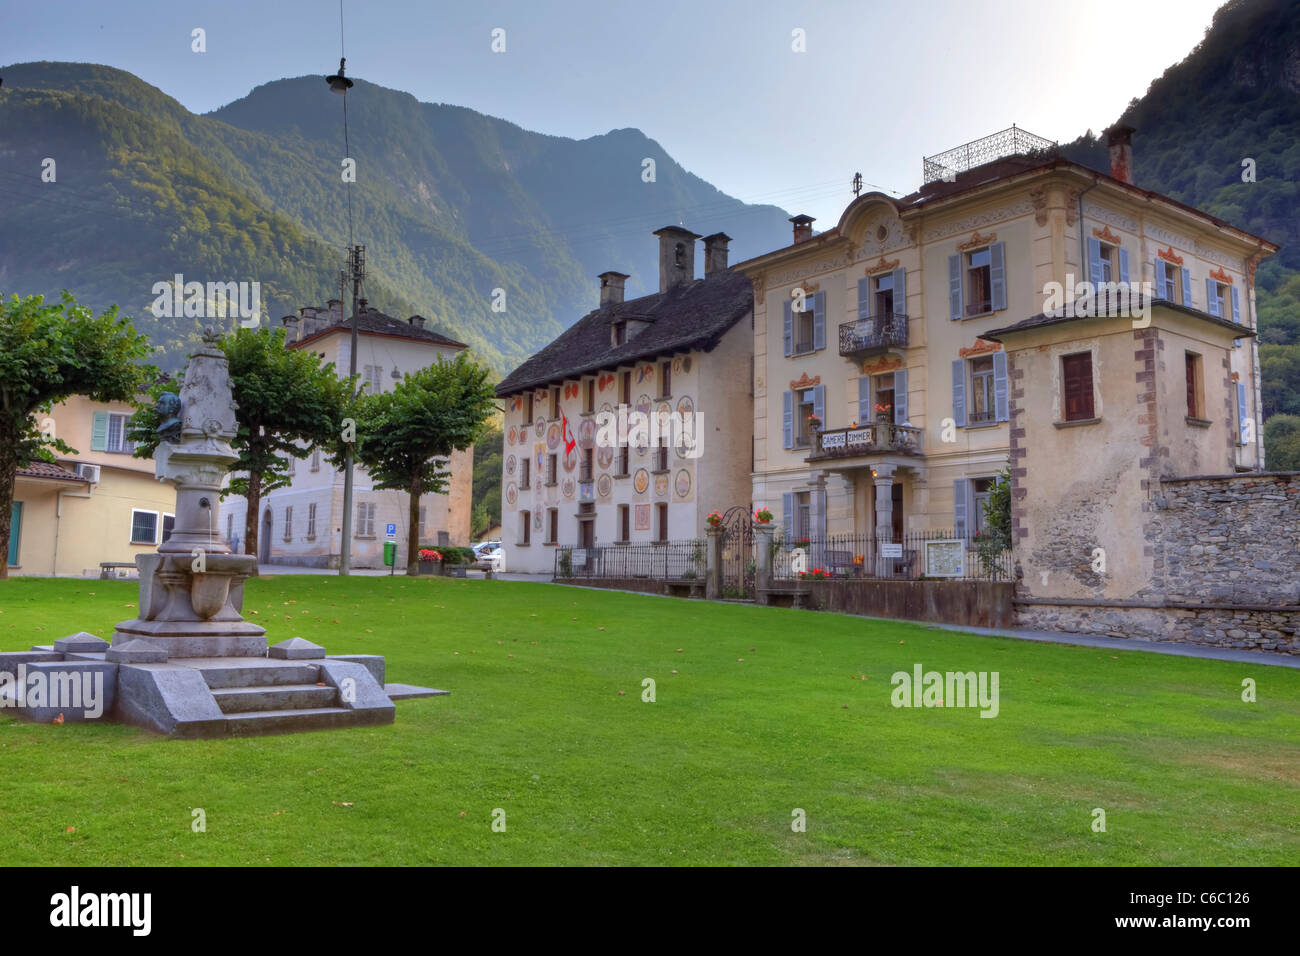 The town square with fountain and sculptures in Cevio, Vallemaggioa, Ticino, Switzerland Stock Photo